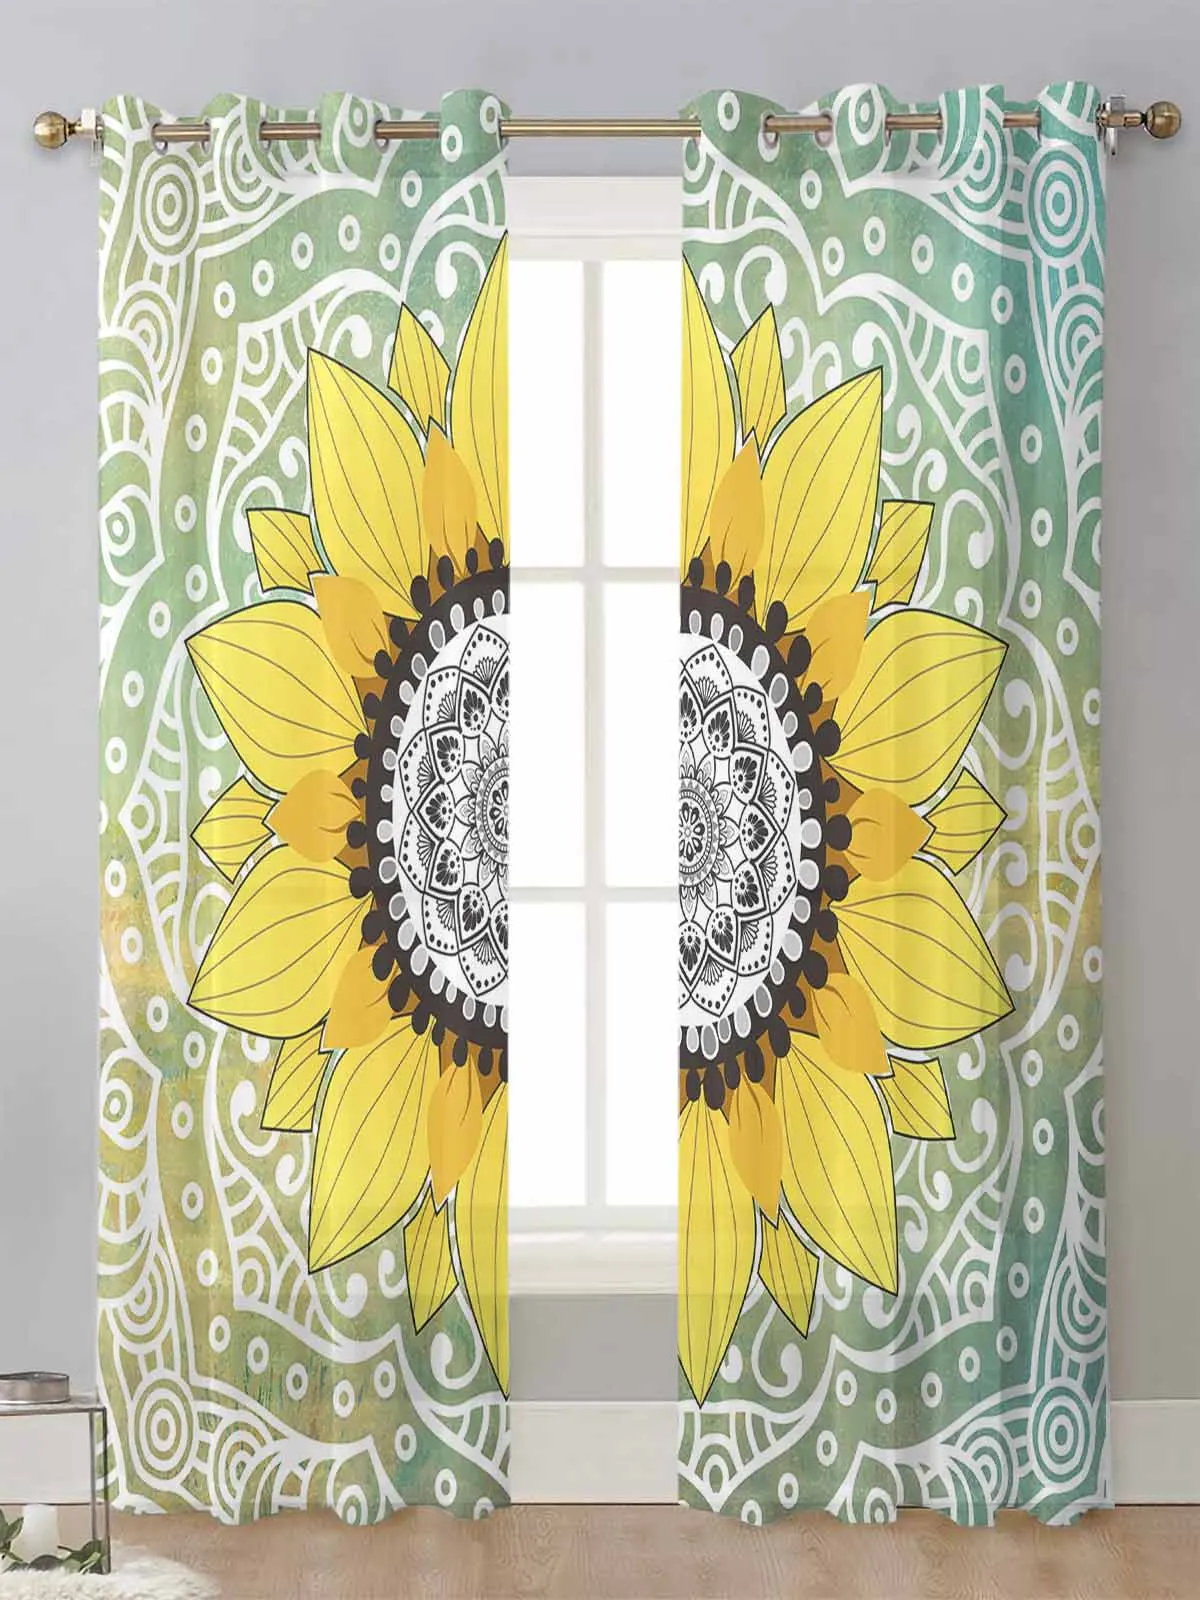 

Sunflower Mandala Sheer Curtains For Living Room Window Screening Transparent Voile Tulle Curtain Cortinas Drapes Home Decor